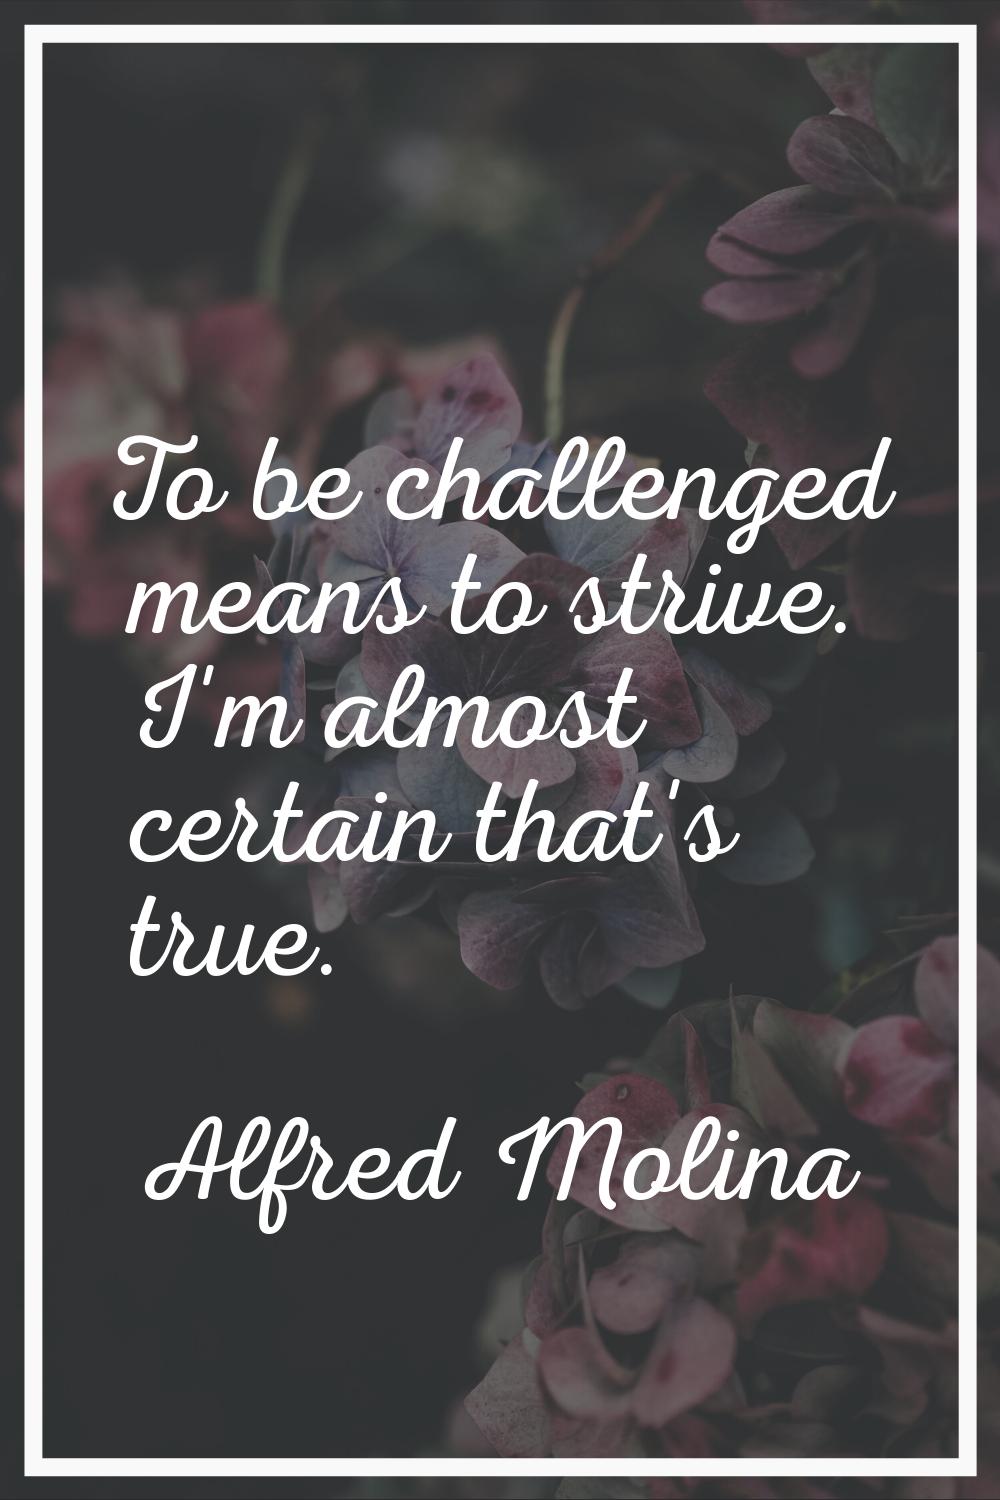 To be challenged means to strive. I'm almost certain that's true.